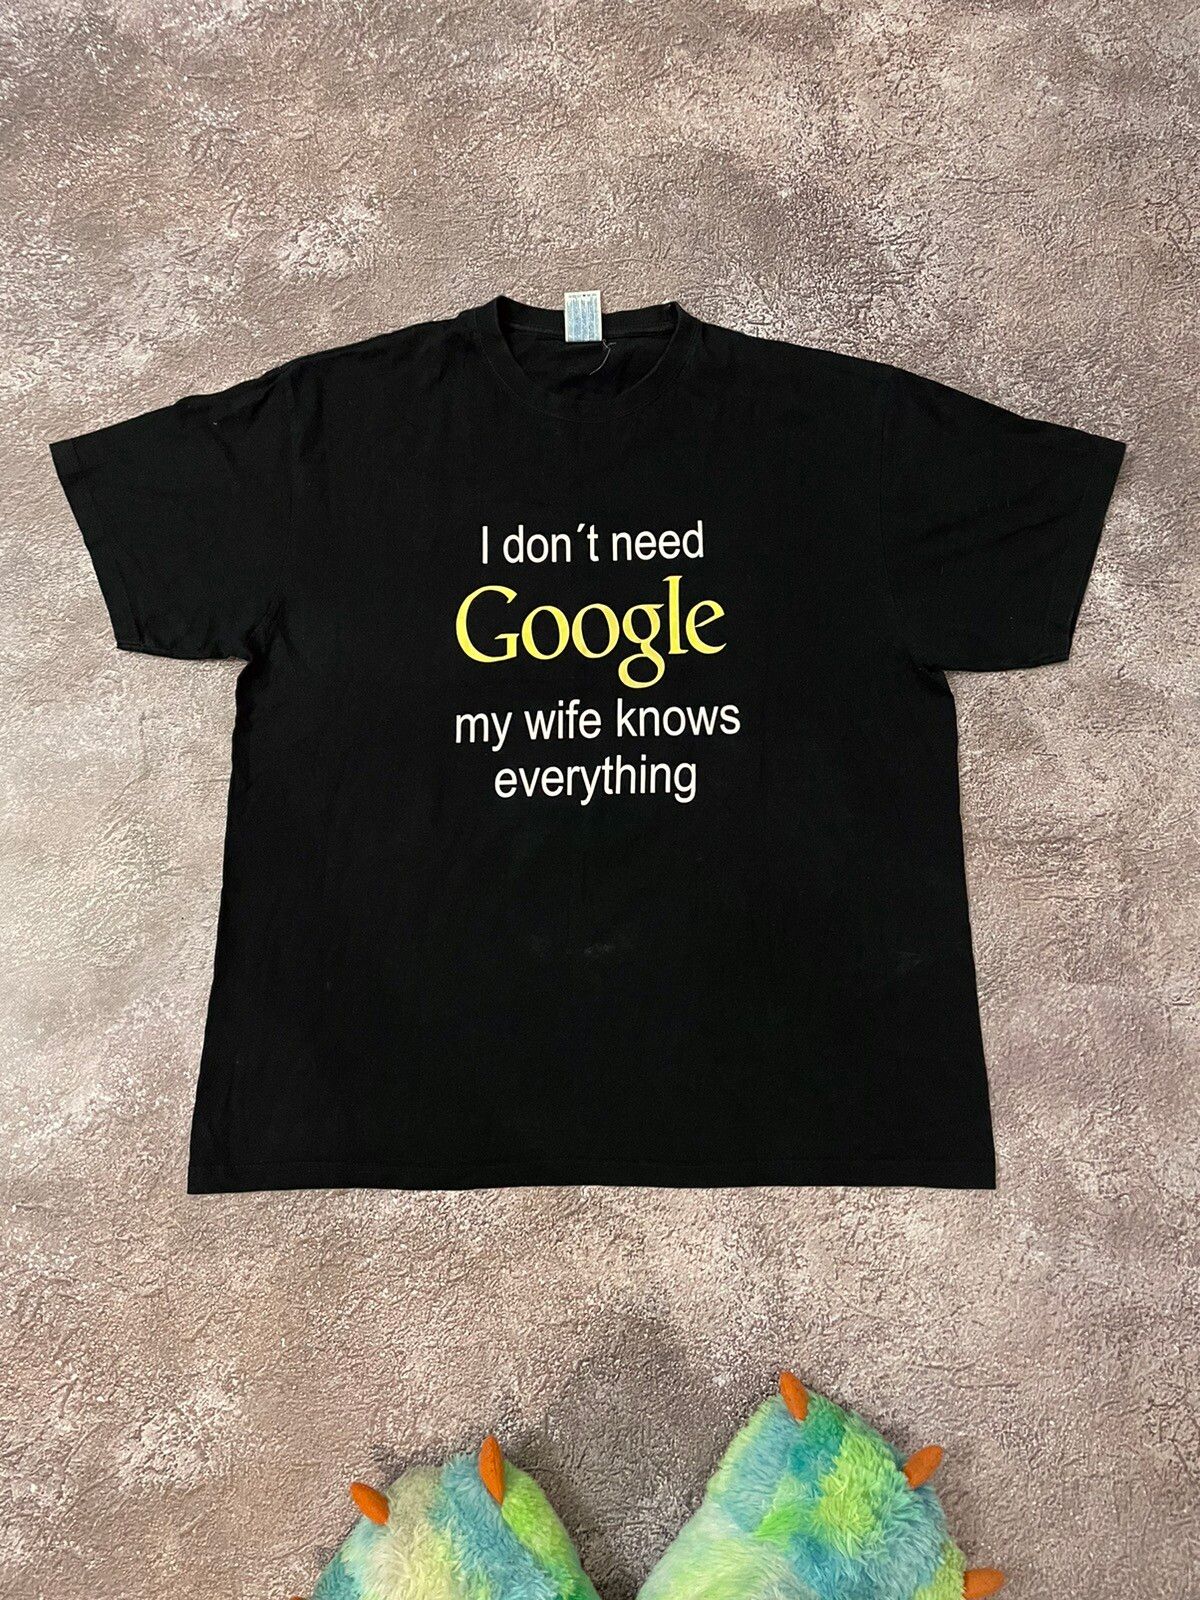 Vintage VINTAGE 90S HUMOR TEE “ I DONT NEED GOOGLE WIFE “ BUYMYSTUFF Size US XL / EU 56 / 4 - 2 Preview